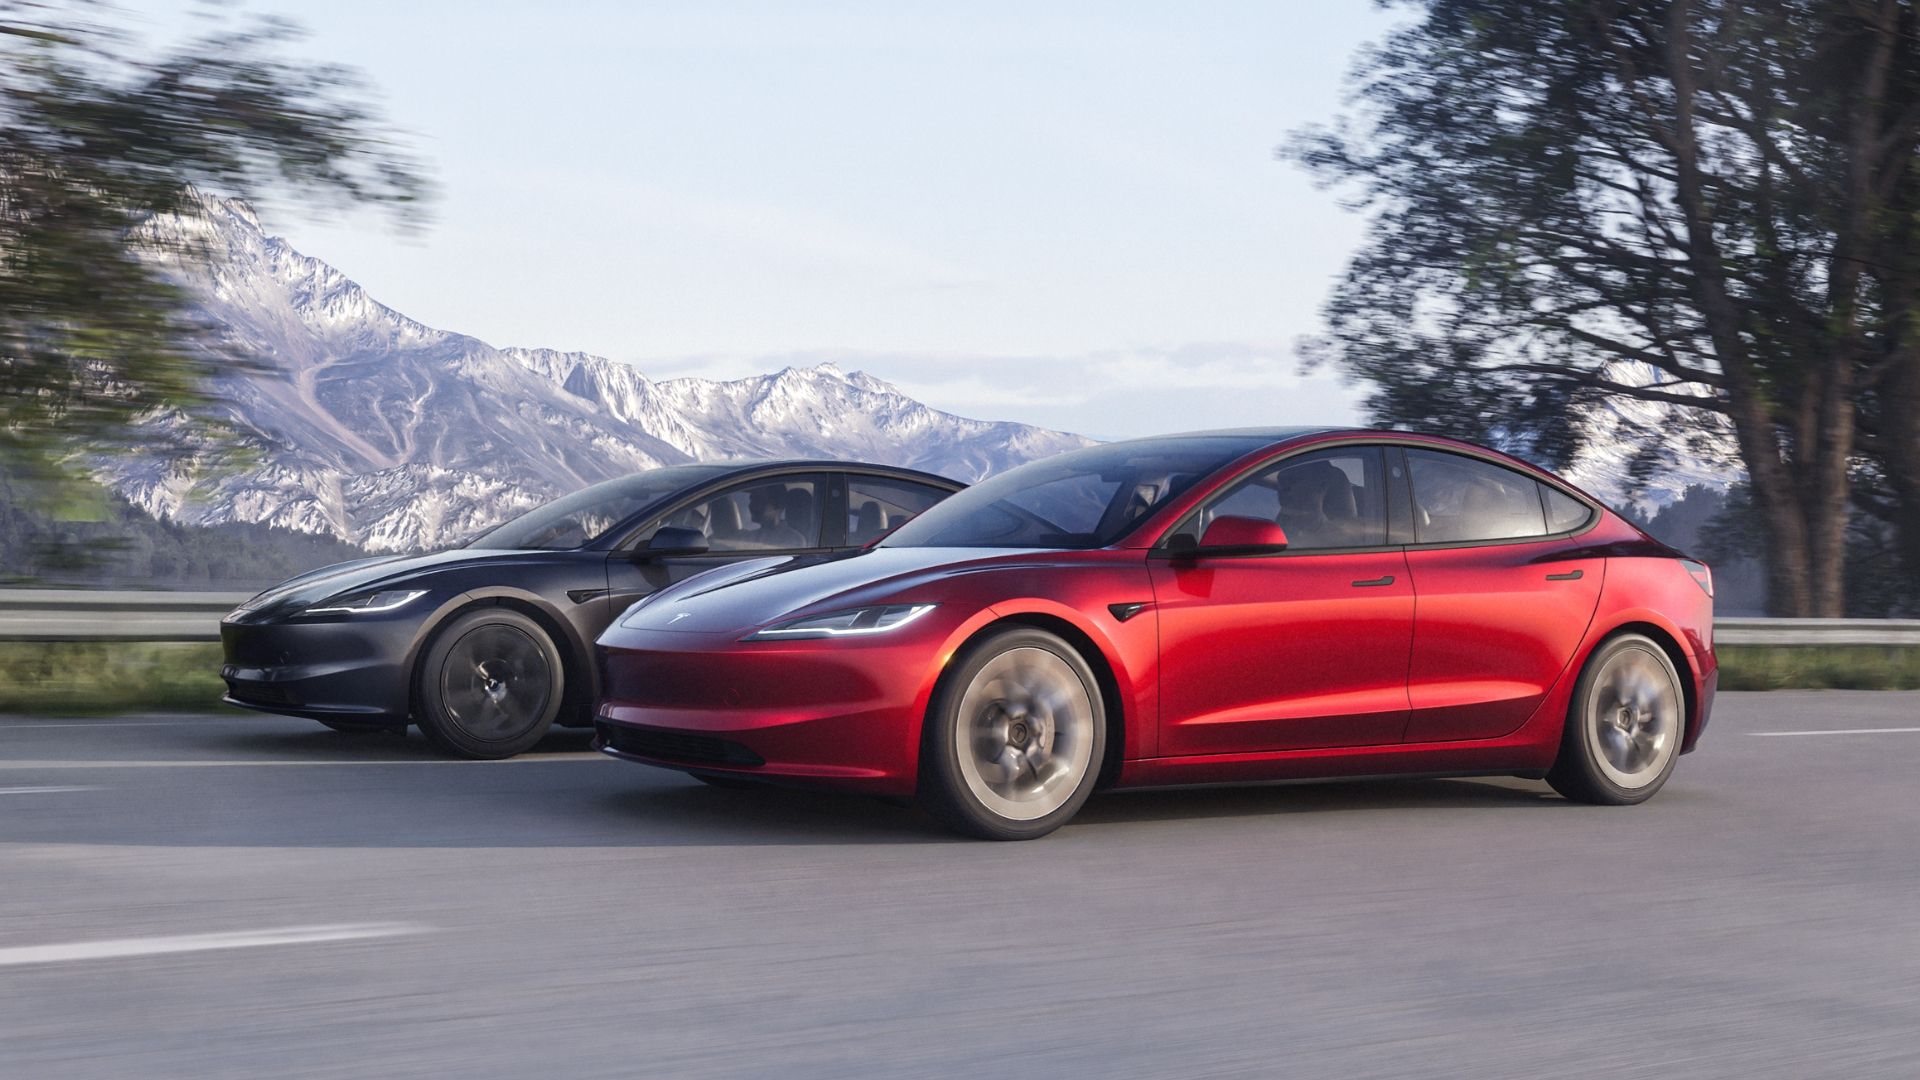 New Tesla Model 3 Highland Is Worlds Better Than My 2019 Tesla Model 3 -  CleanTechnica